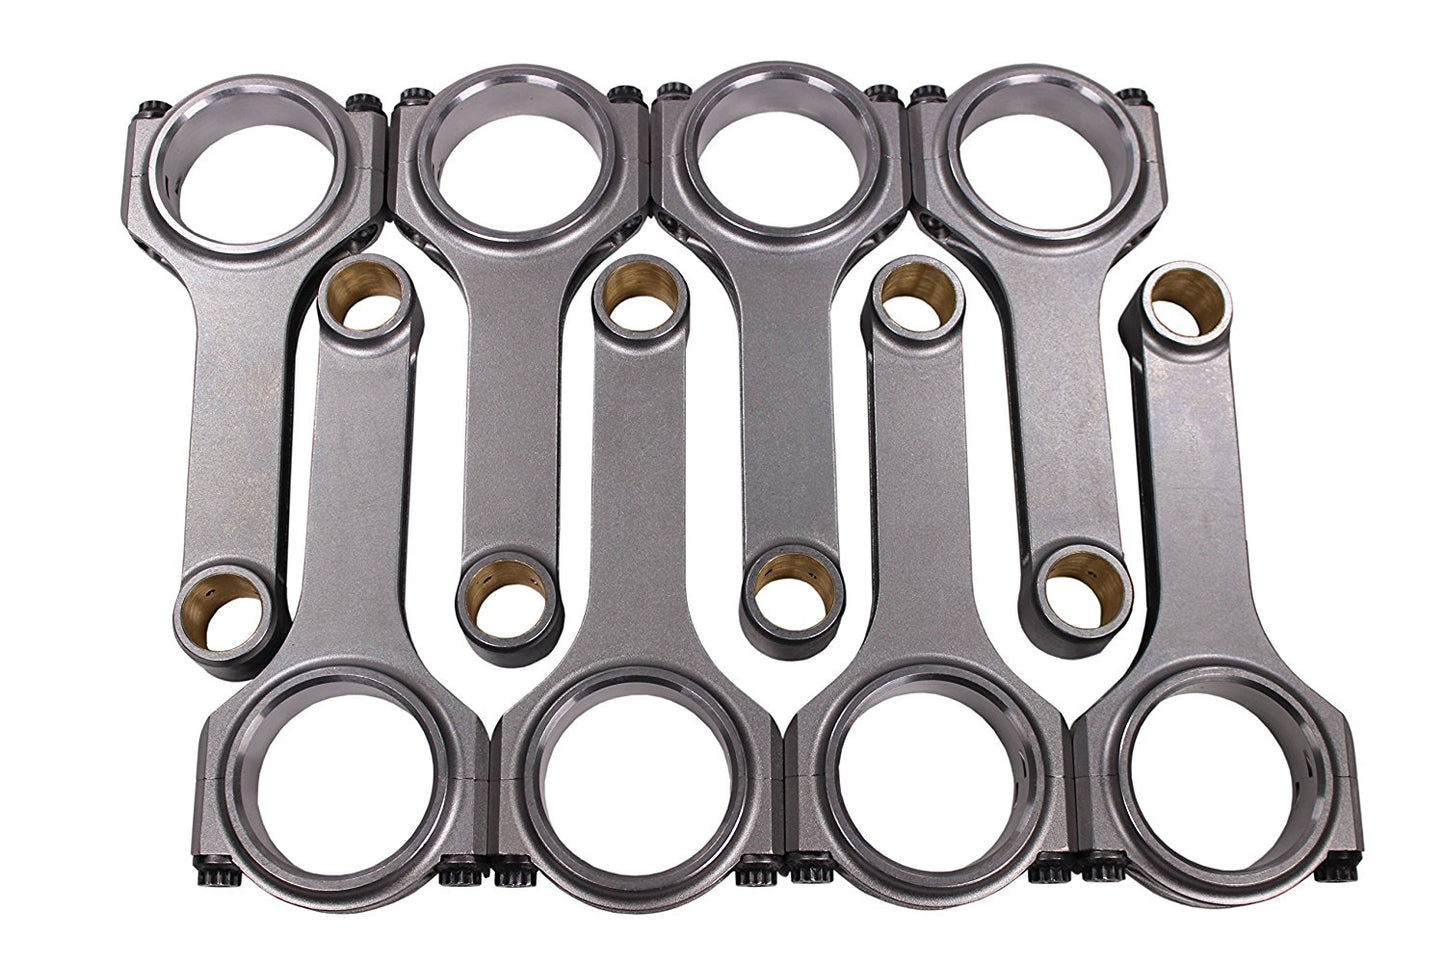 H Beam 6.000" 2.100" .927" Bronze Bush 4340 Connecting Rods for Chevy SBC 350